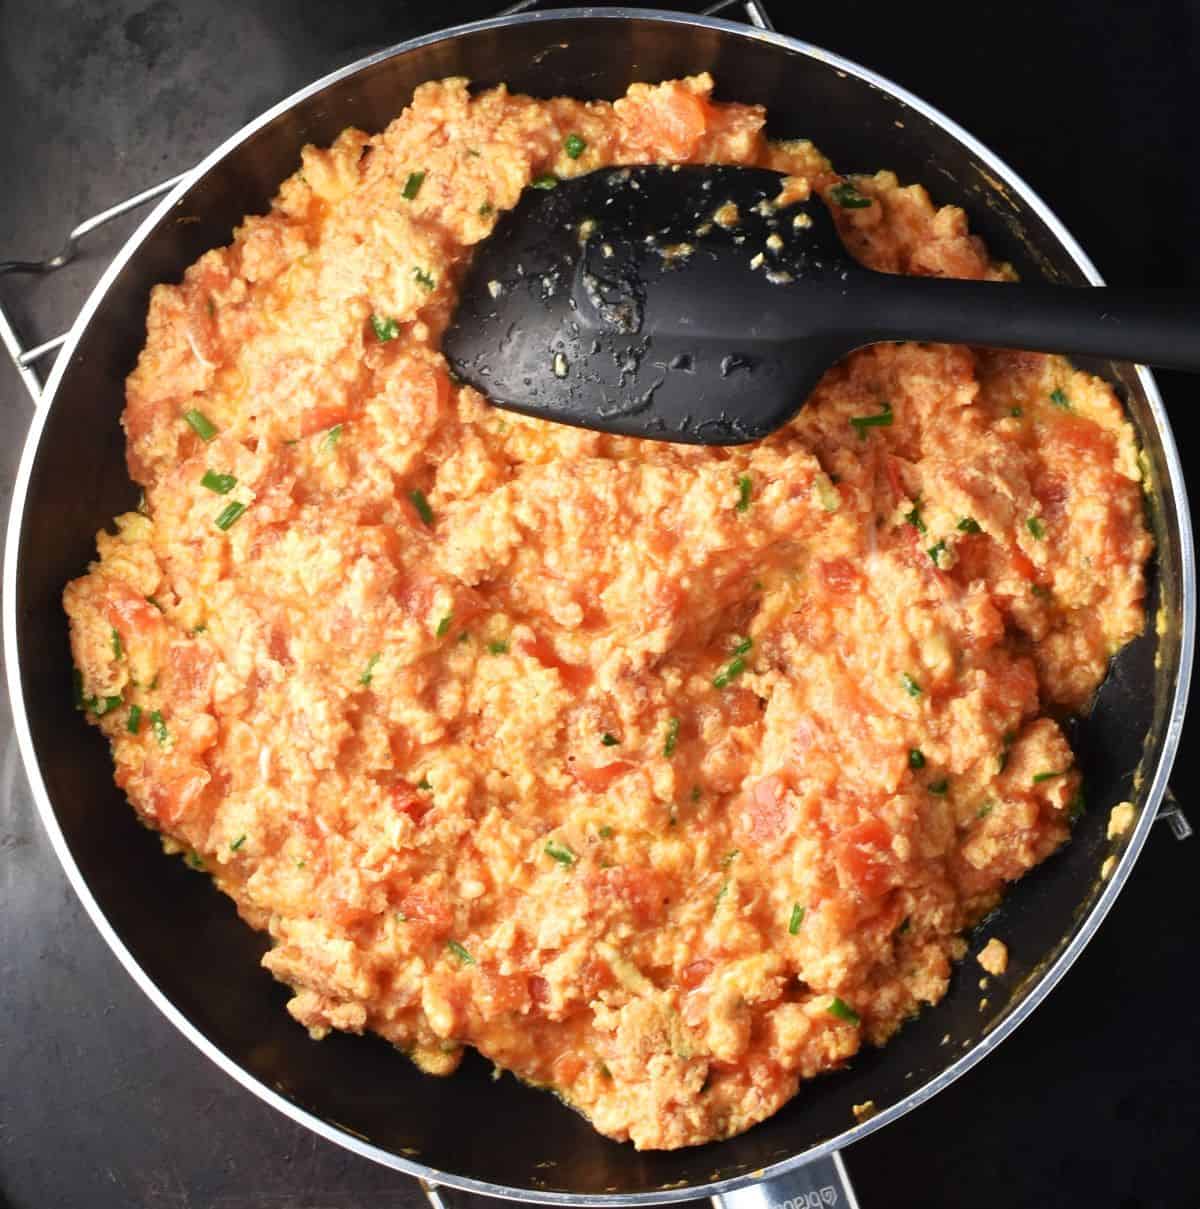 Top down view of tomato scrambled eggs with black spatula in pan.